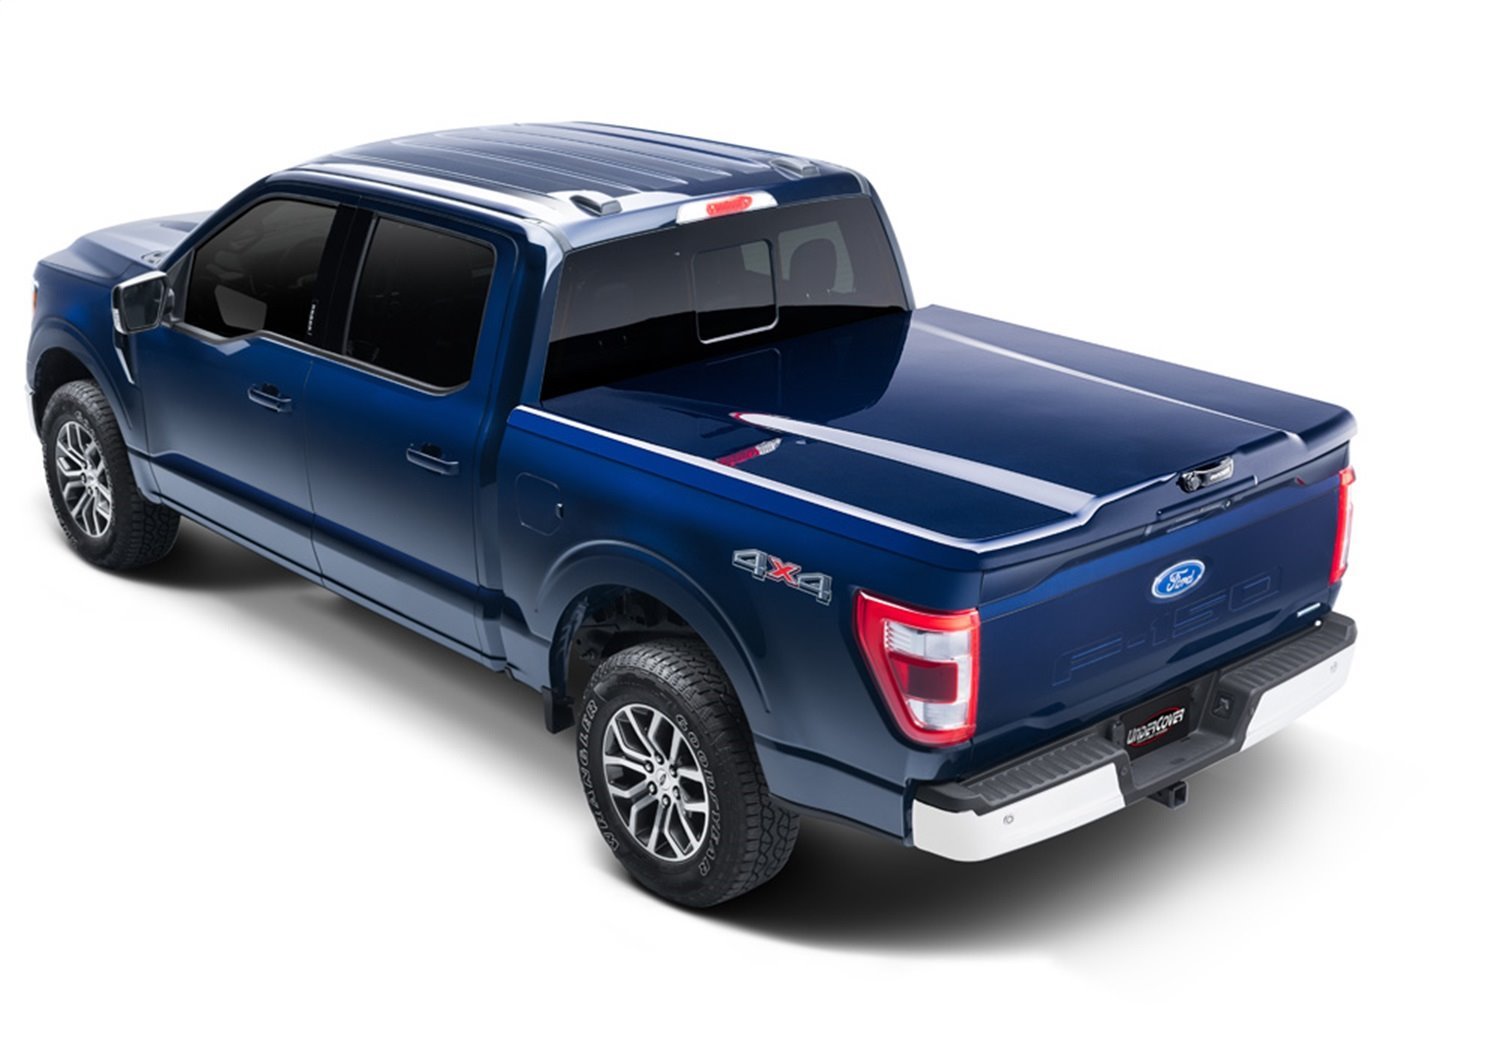 UC2208L-A3 Elite LX Hard Non-Folding Cover, Fits Select Ford F-150 5'7" Bed Crew (Includes Lightning) A3 Space White